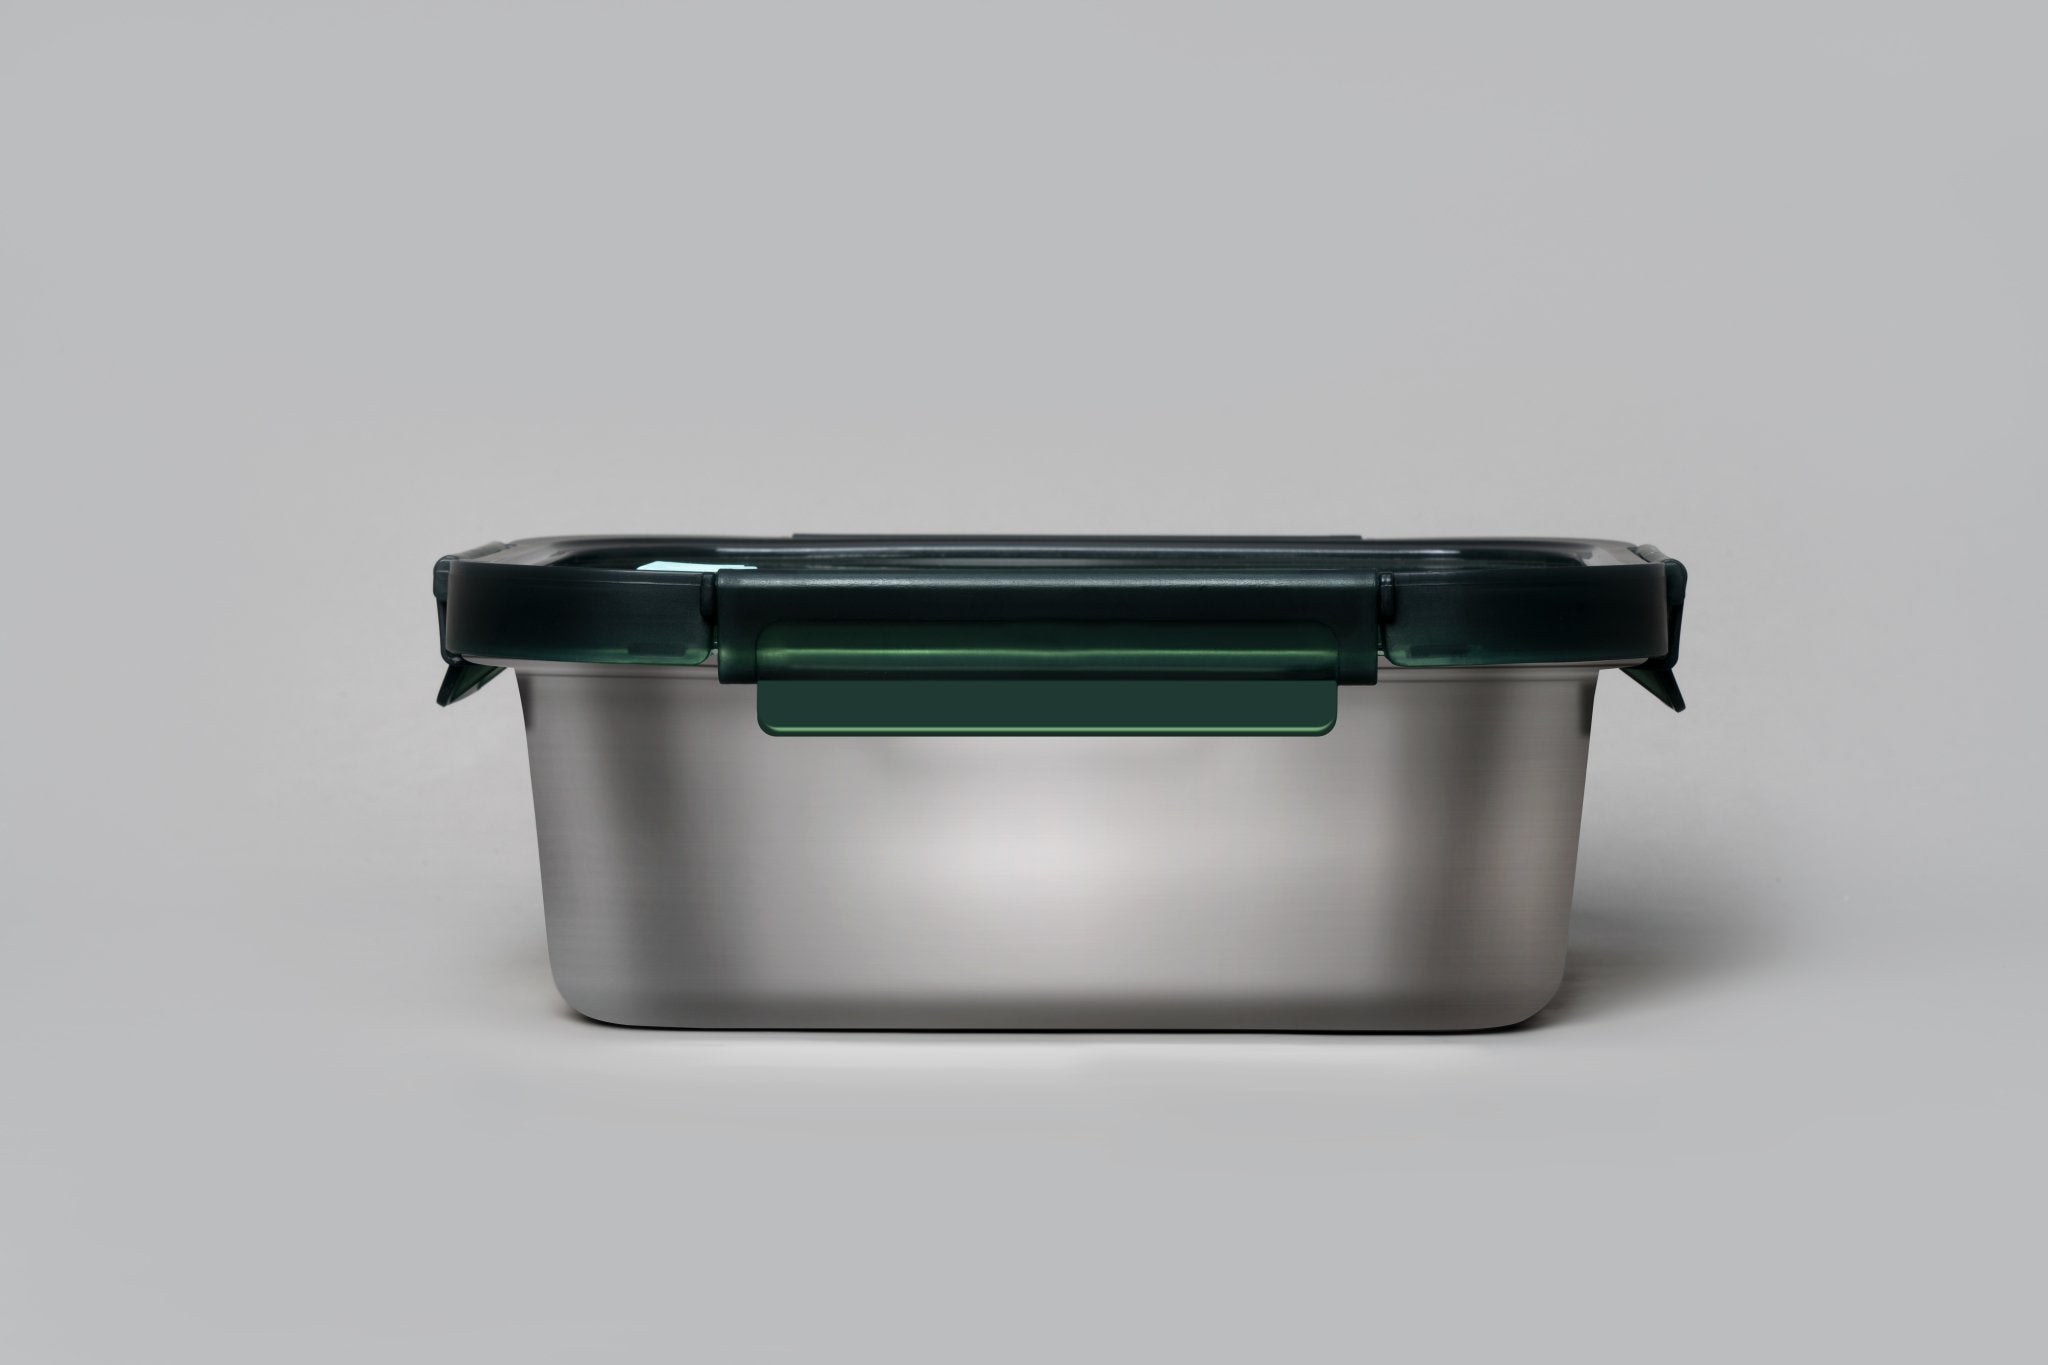 https://genicook.com/cdn/shop/products/rectangular-microwave-safe-stainless-steel-container-800-1200-or-1800-mlgenicooksiv800rc-gr-491182.jpg?v=1699599722